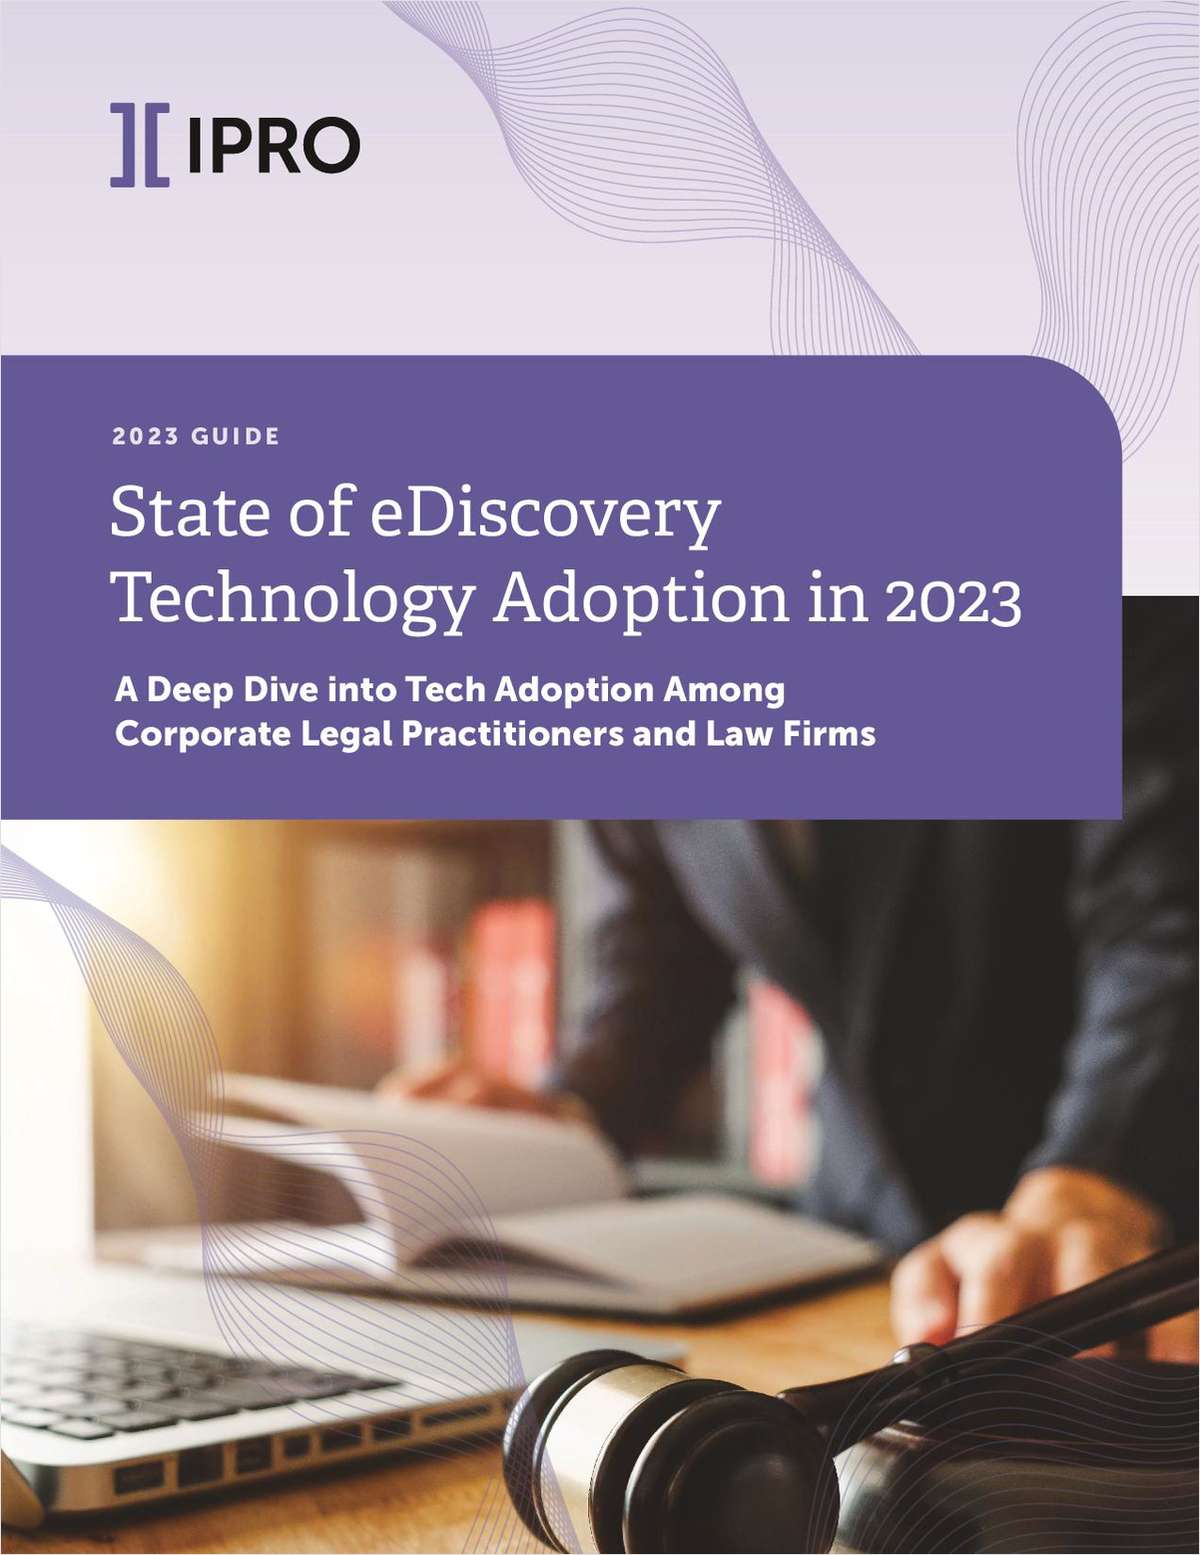 Download this guide for an overview of the state of eDiscovery in 2023, the perceptions of corporate lawyers towards eDiscovery tools, and explore the impact of new and emerging technologies, like AI, on the legal profession.